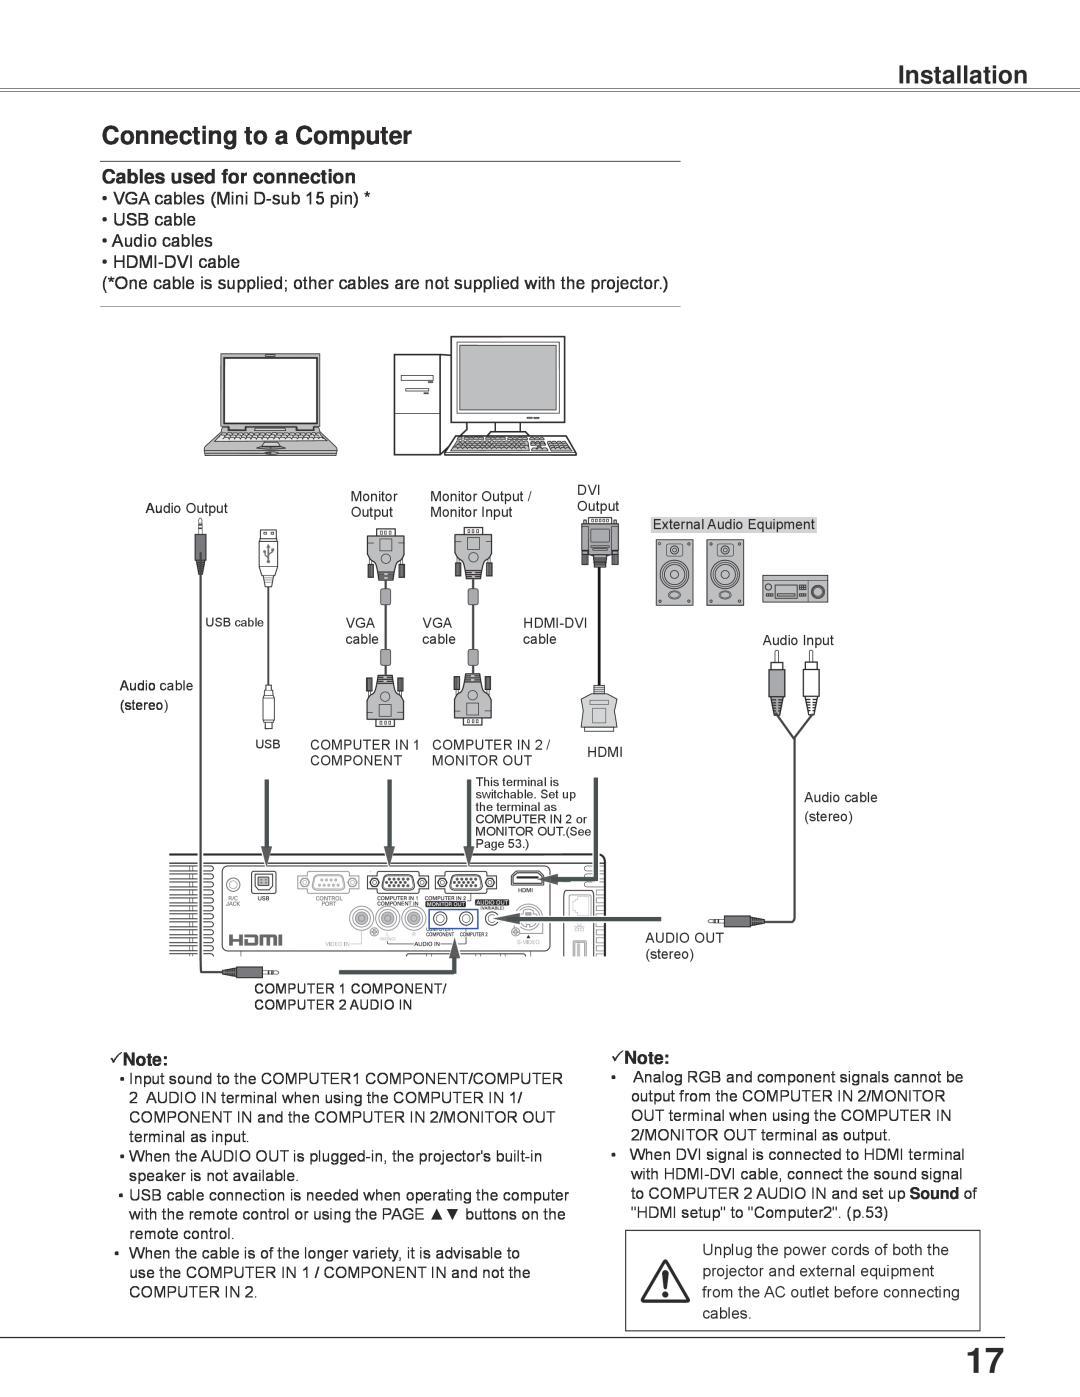 Sanyo PLC-WXU700 owner manual Installation Connecting to a Computer, Cables used for connection, Note 